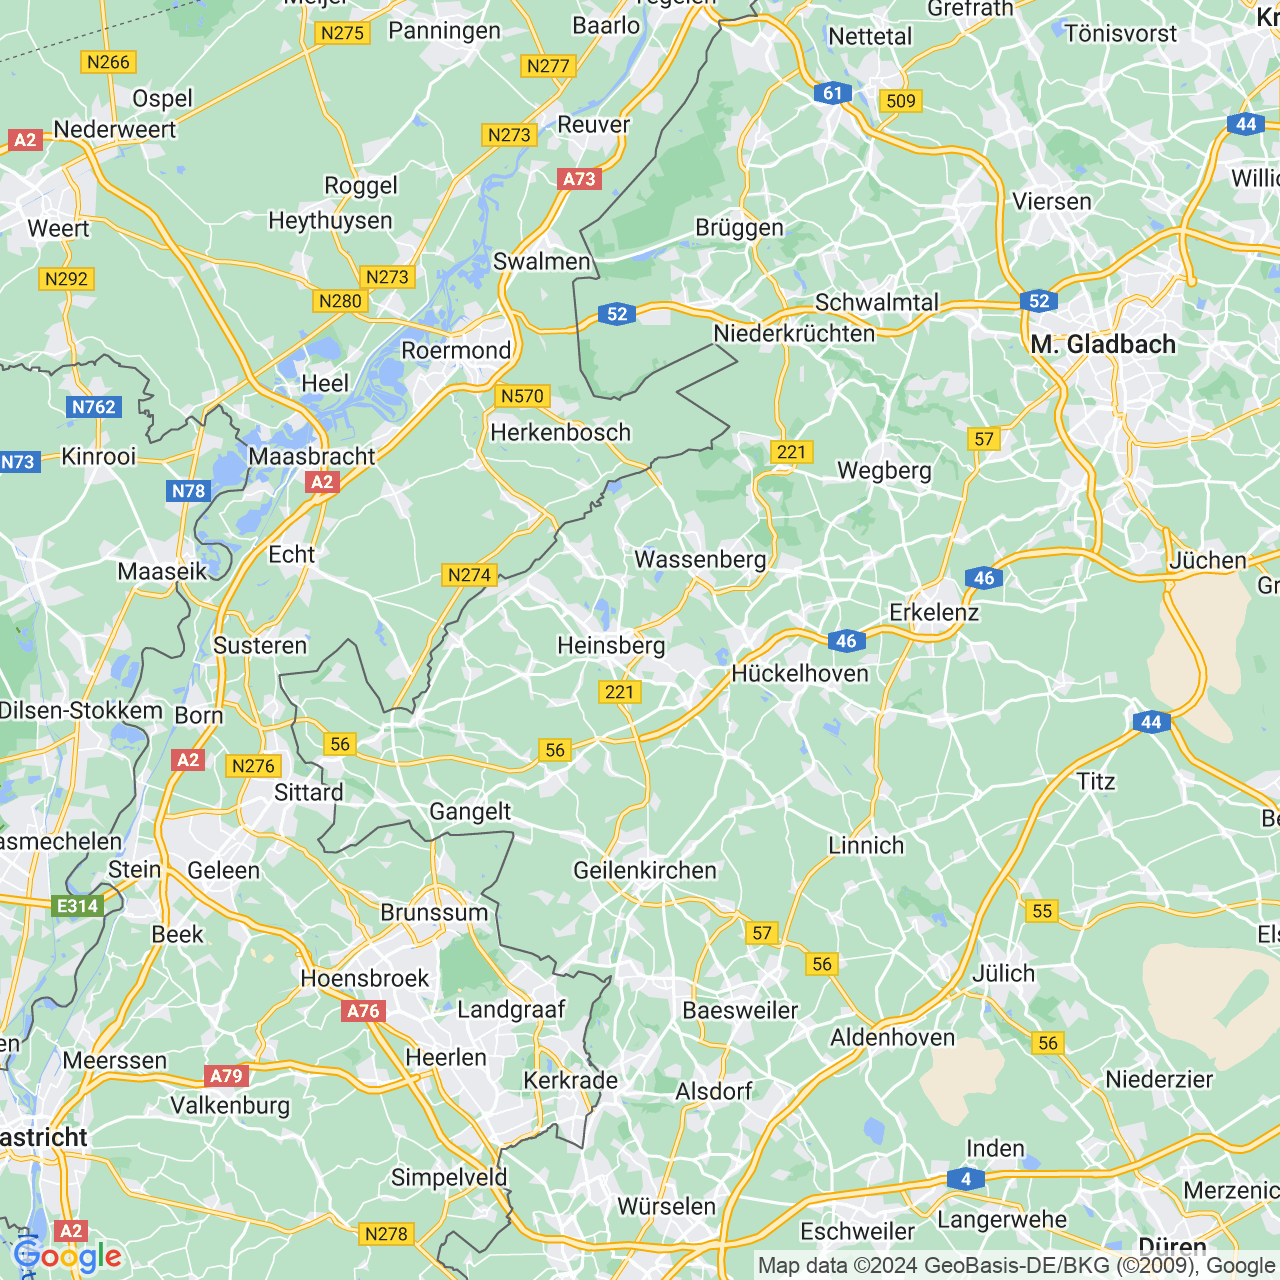 Google maps preview image